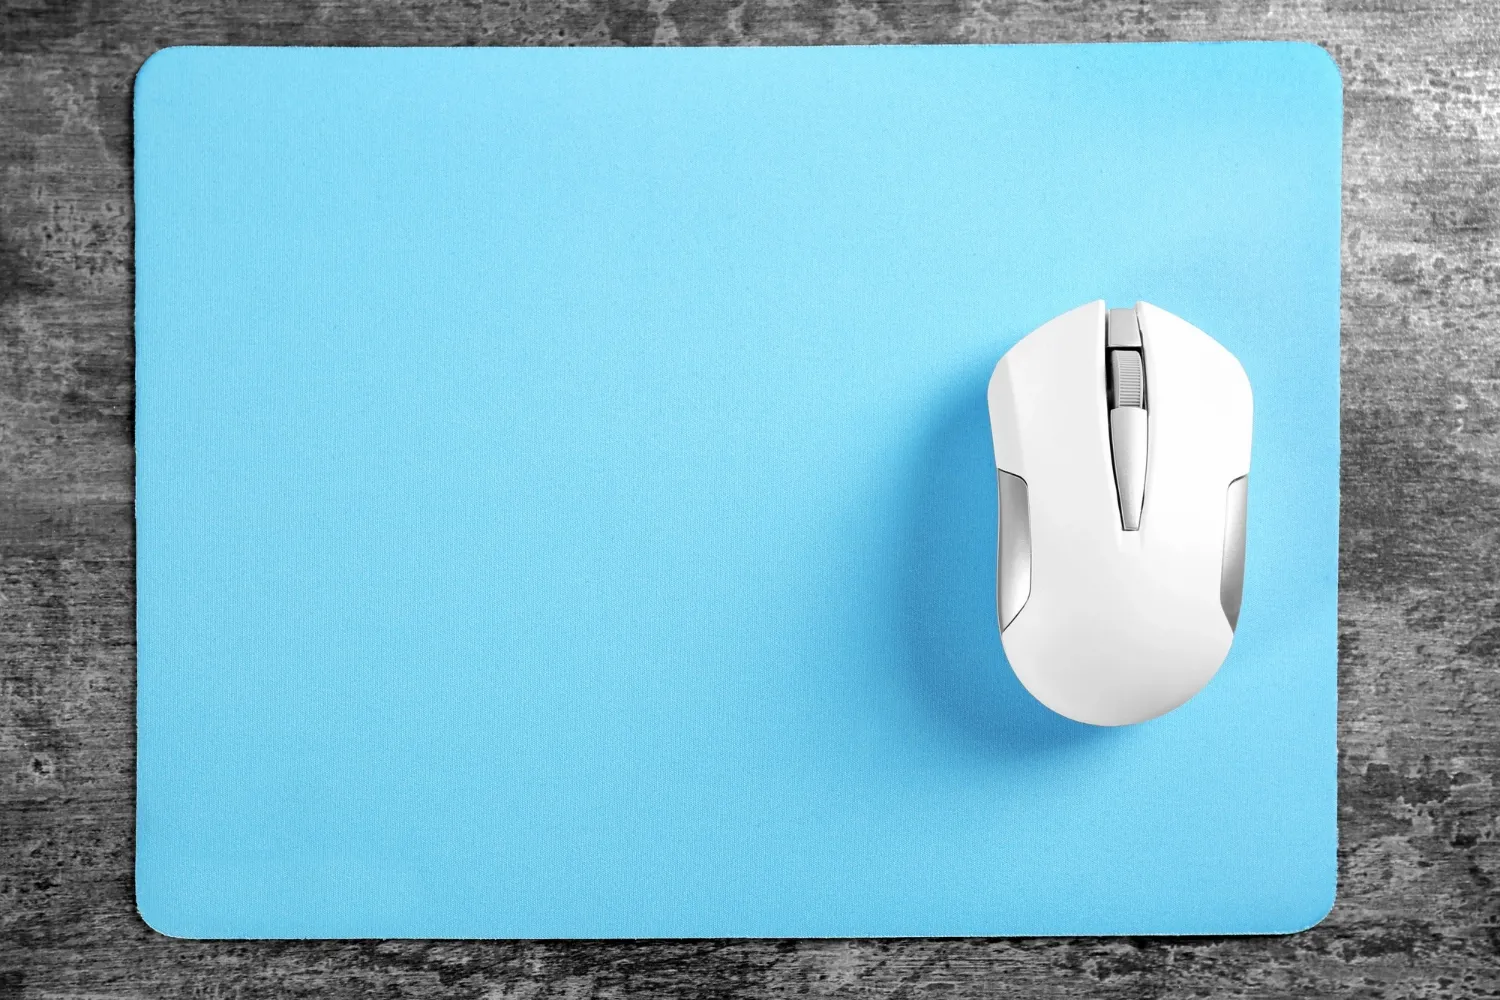 Blank mouse pad and wireless mouse on textured background